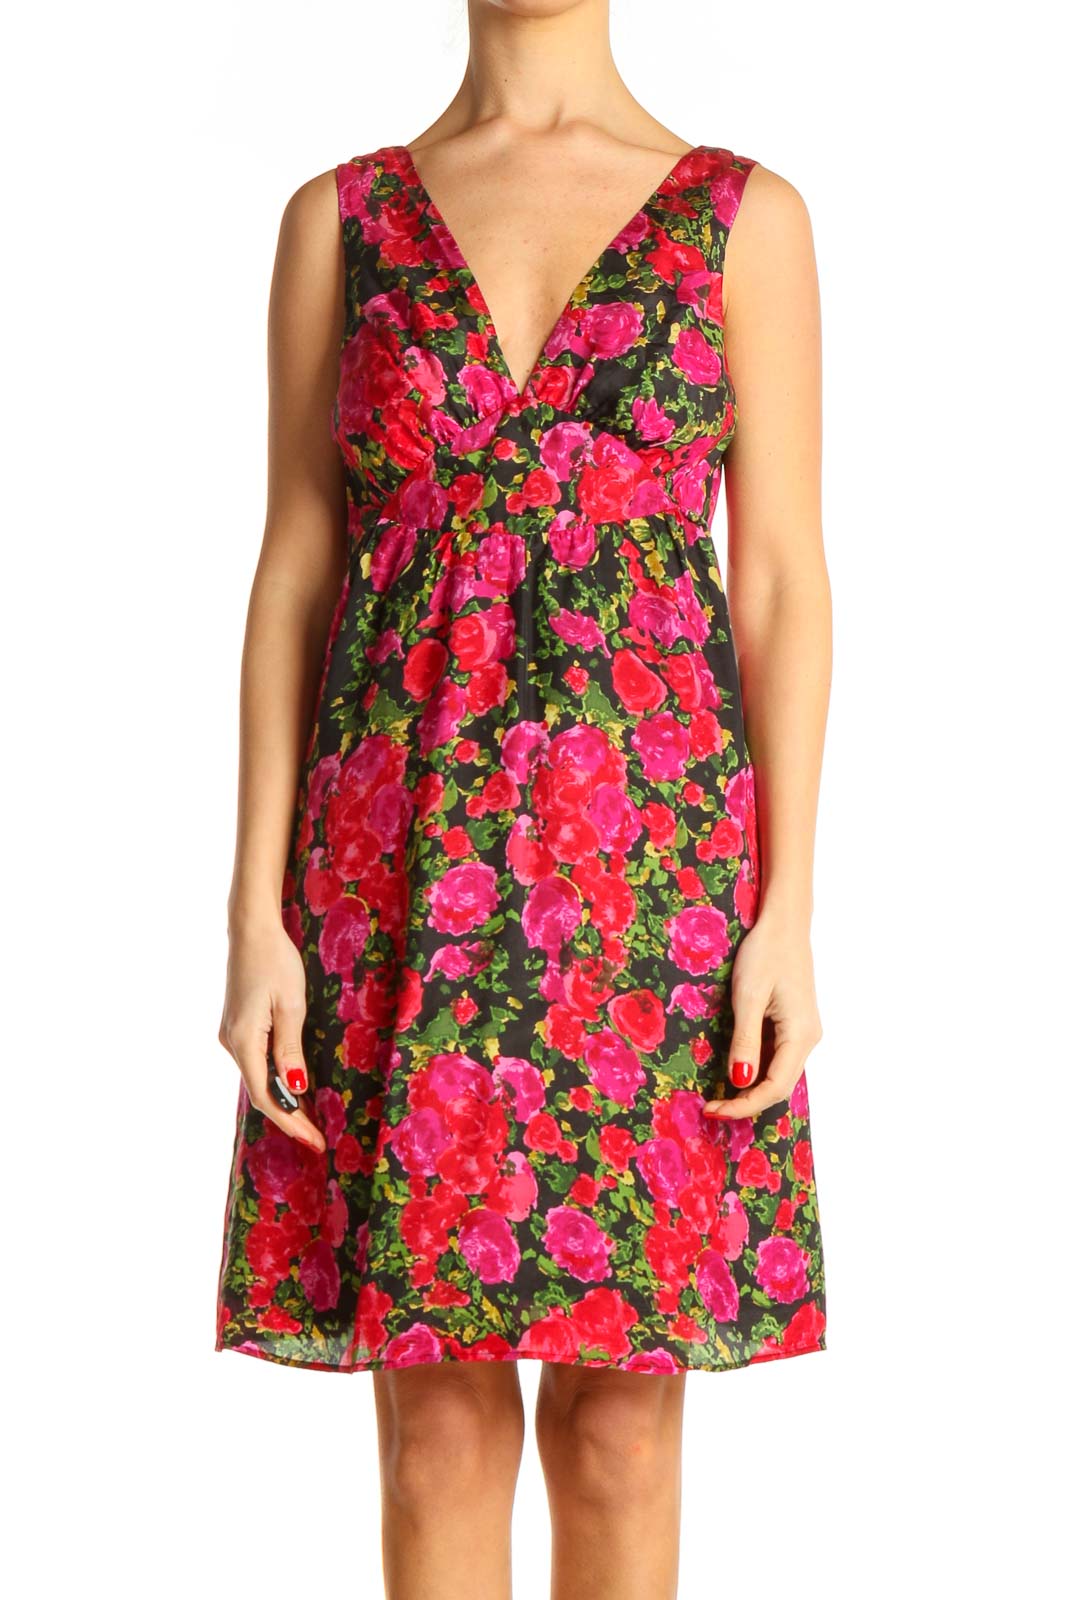 Red Floral Print Retro A-Line Dress Front